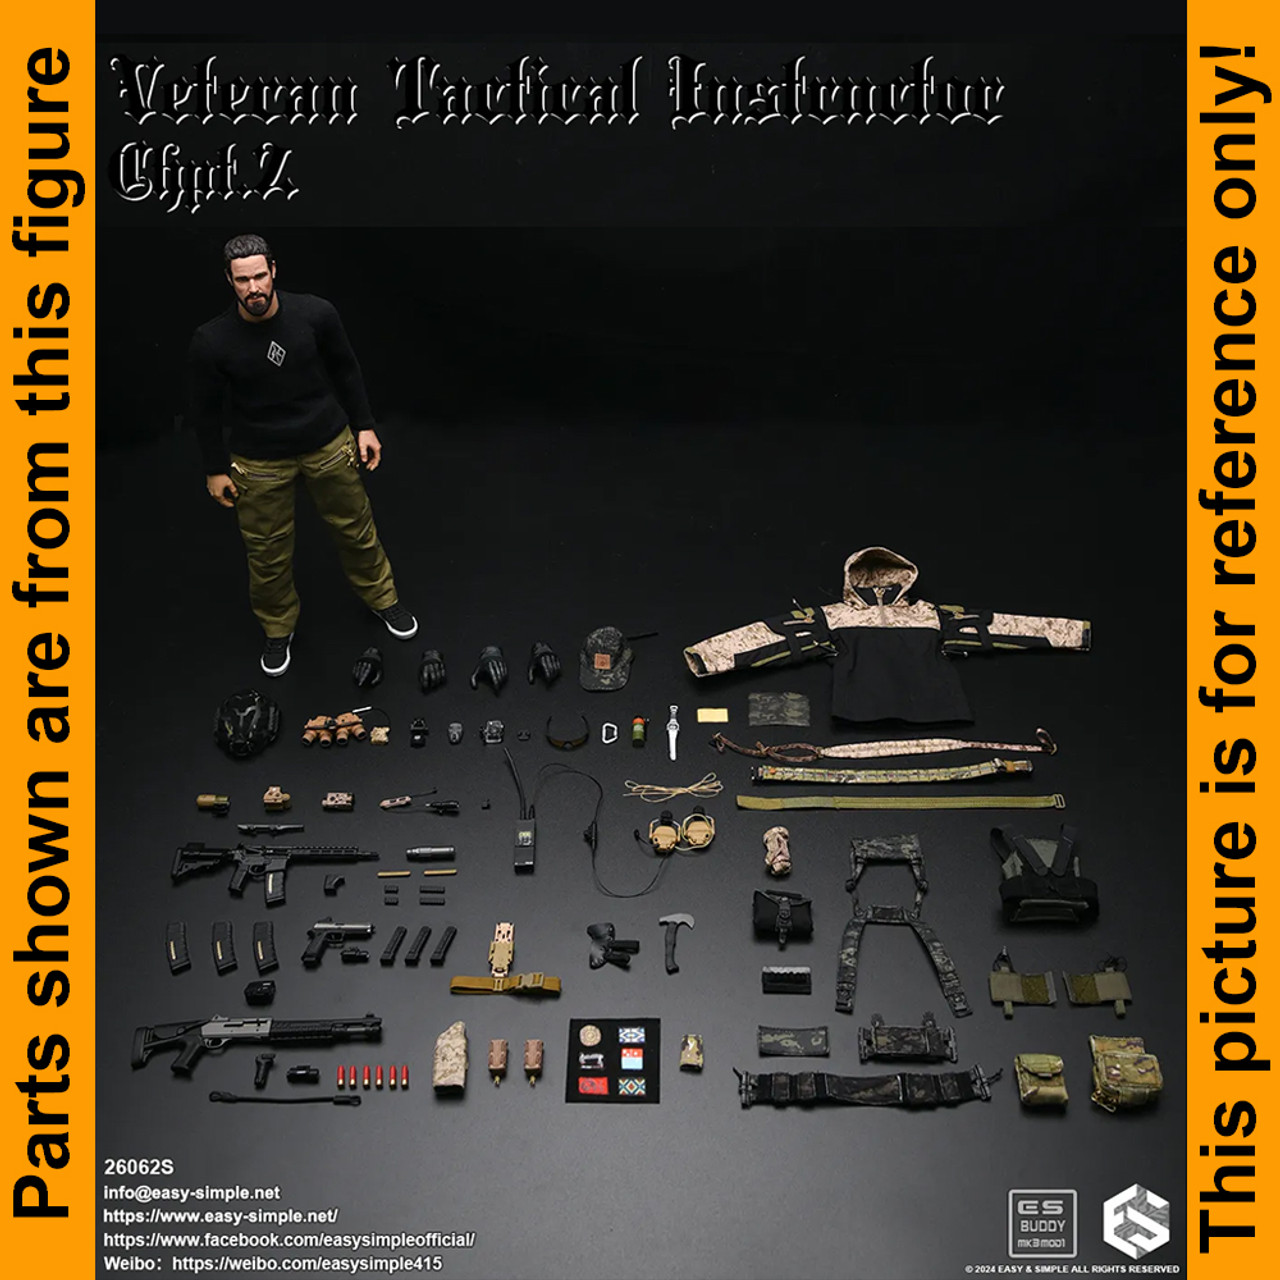 S Tactical Instructor Chpt 2 - Tomahawk Axe - 1/6 Scale